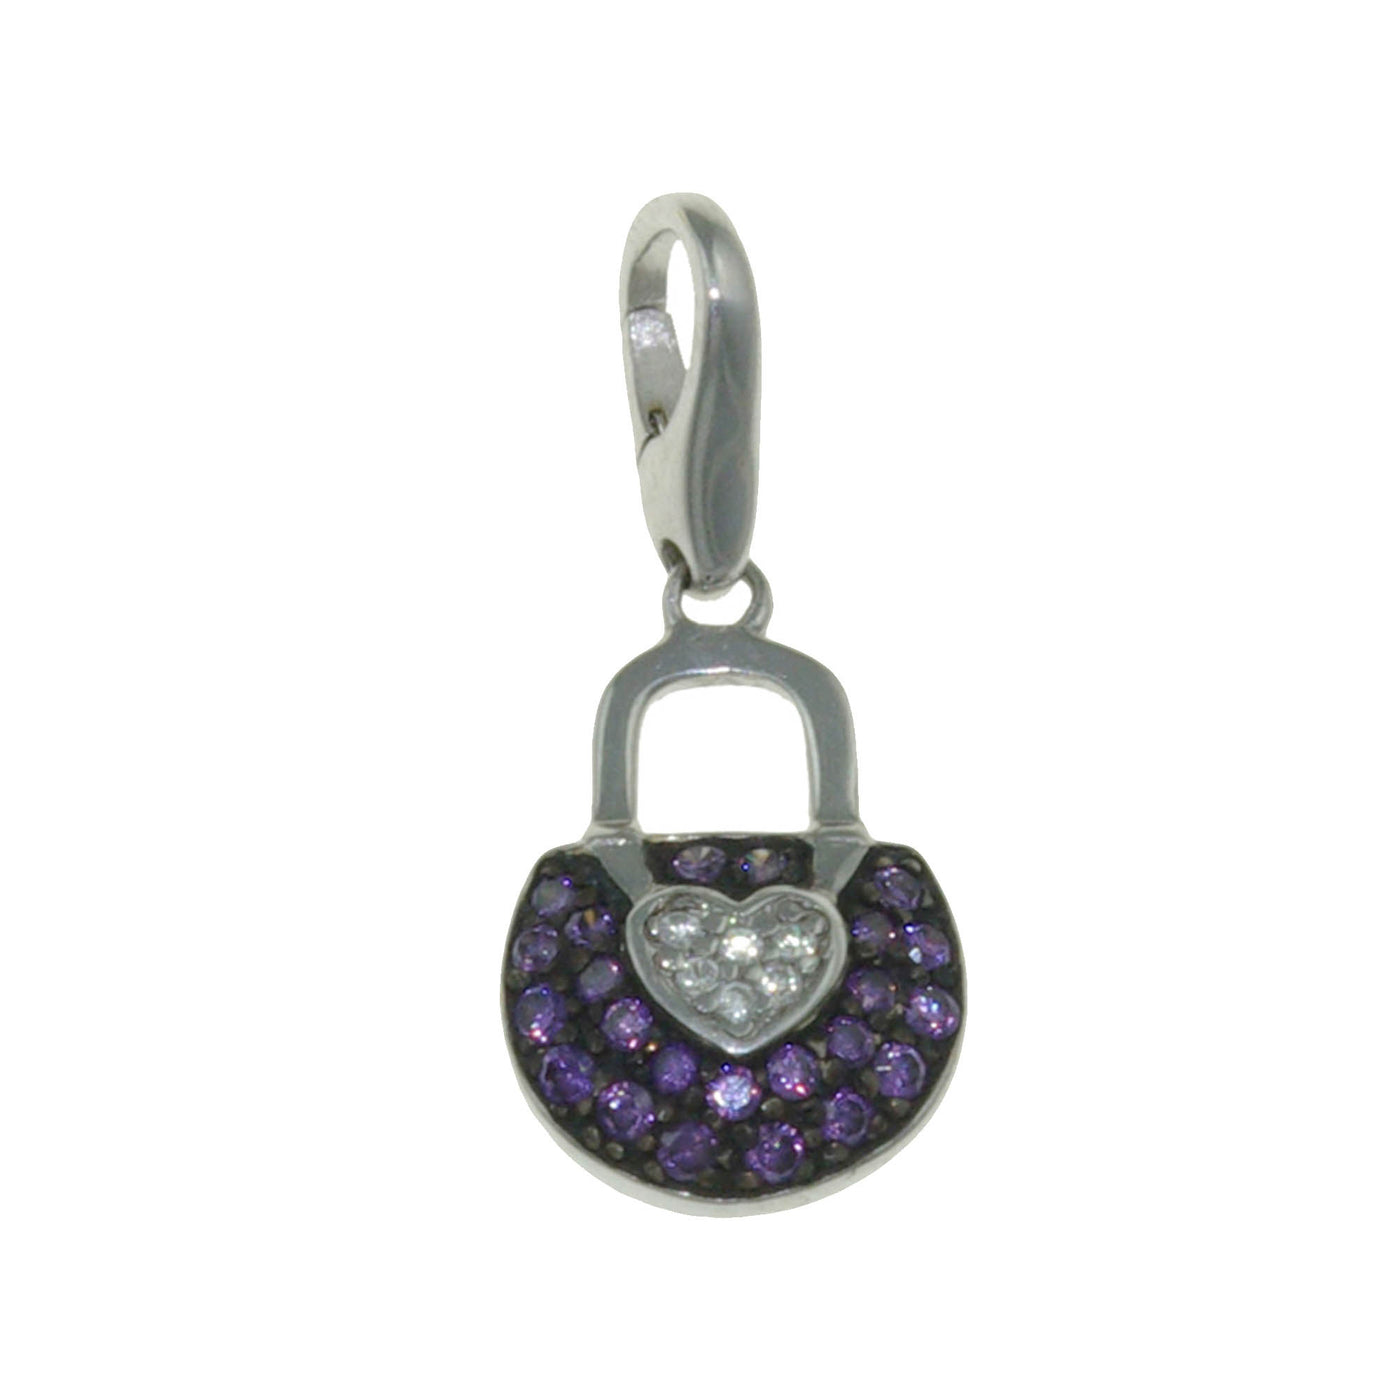 Rebecca Sloane Sterling Silver Lilac Pocketbook With CZ Charm